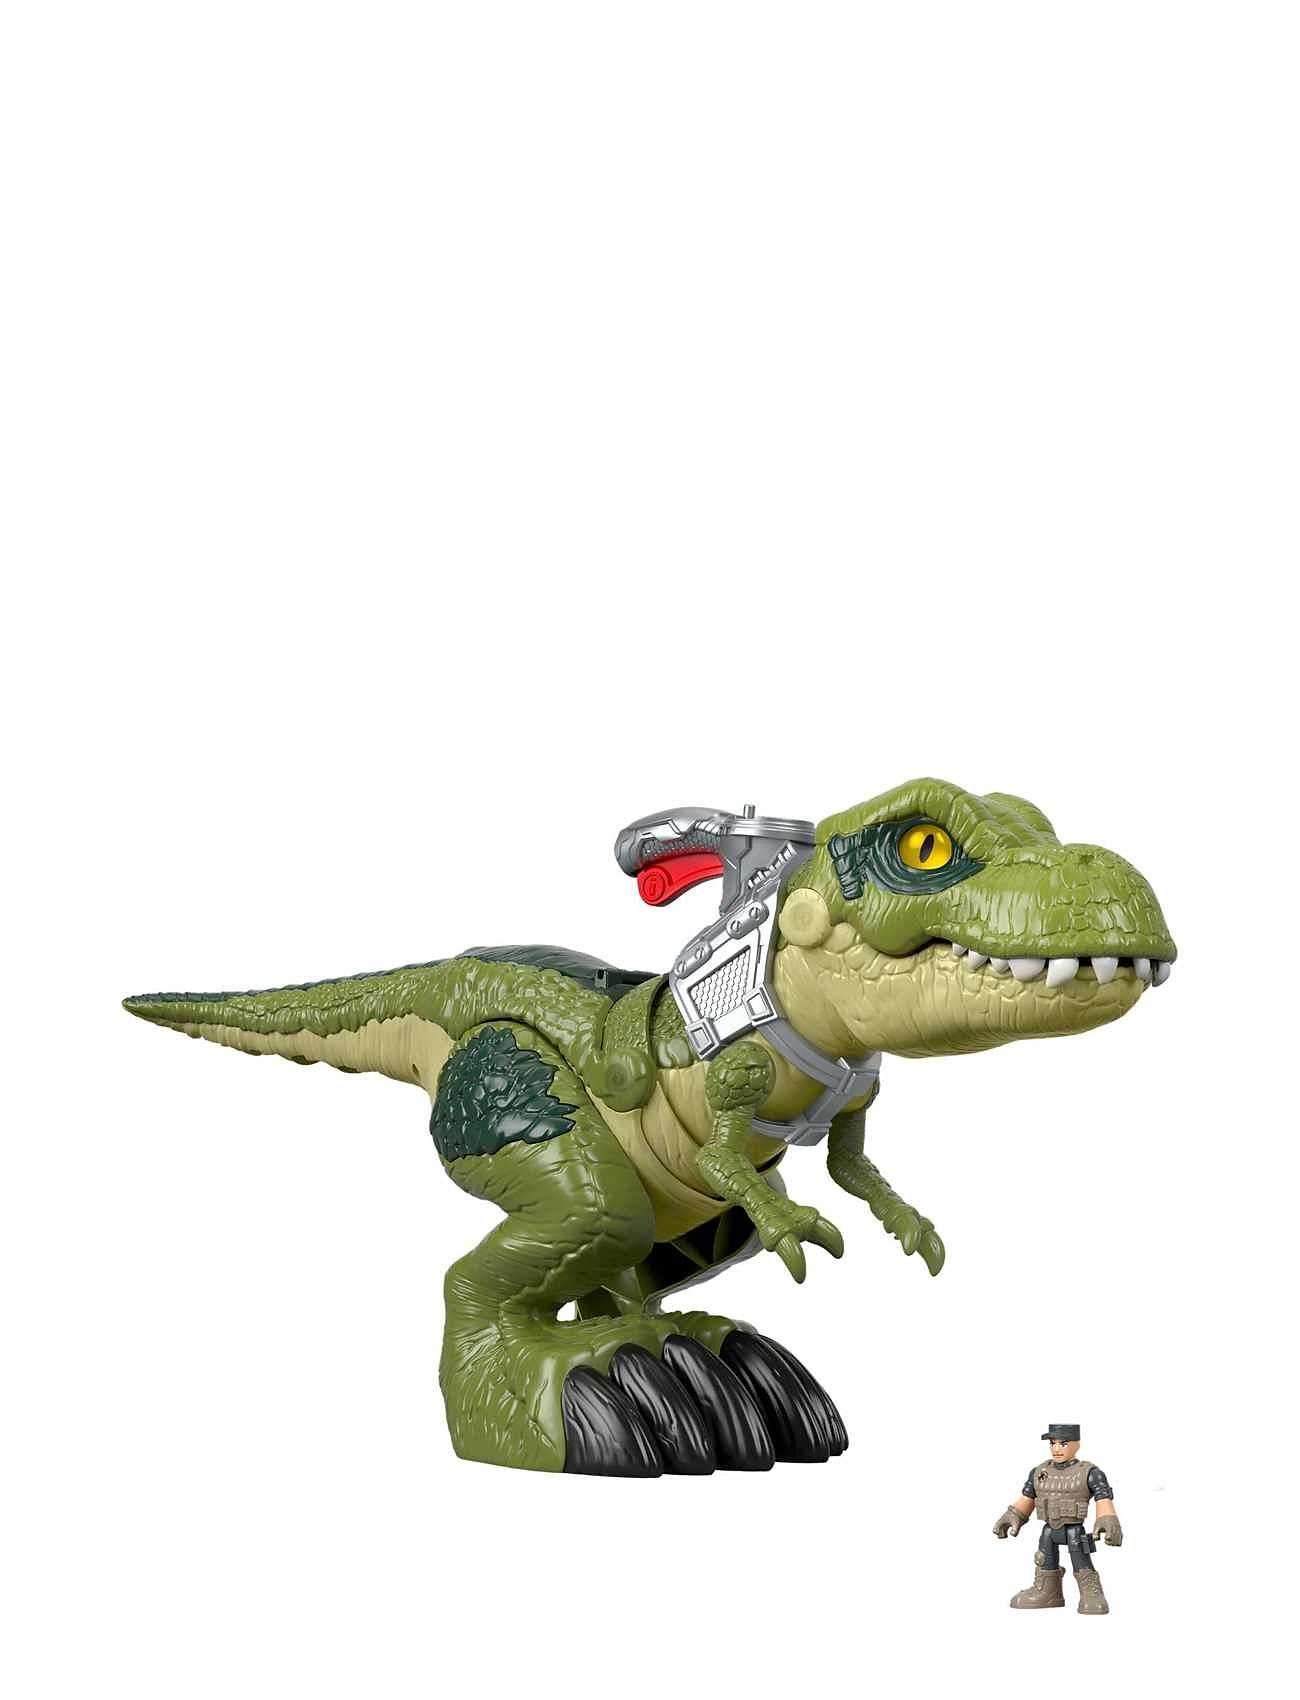 Fisher-Price "Imaginext Jurassic World Mega Mouth T.rex Toys Playsets & Action Figures Movies Fairy Tale Characters Multi/patterned Fisher-Price"